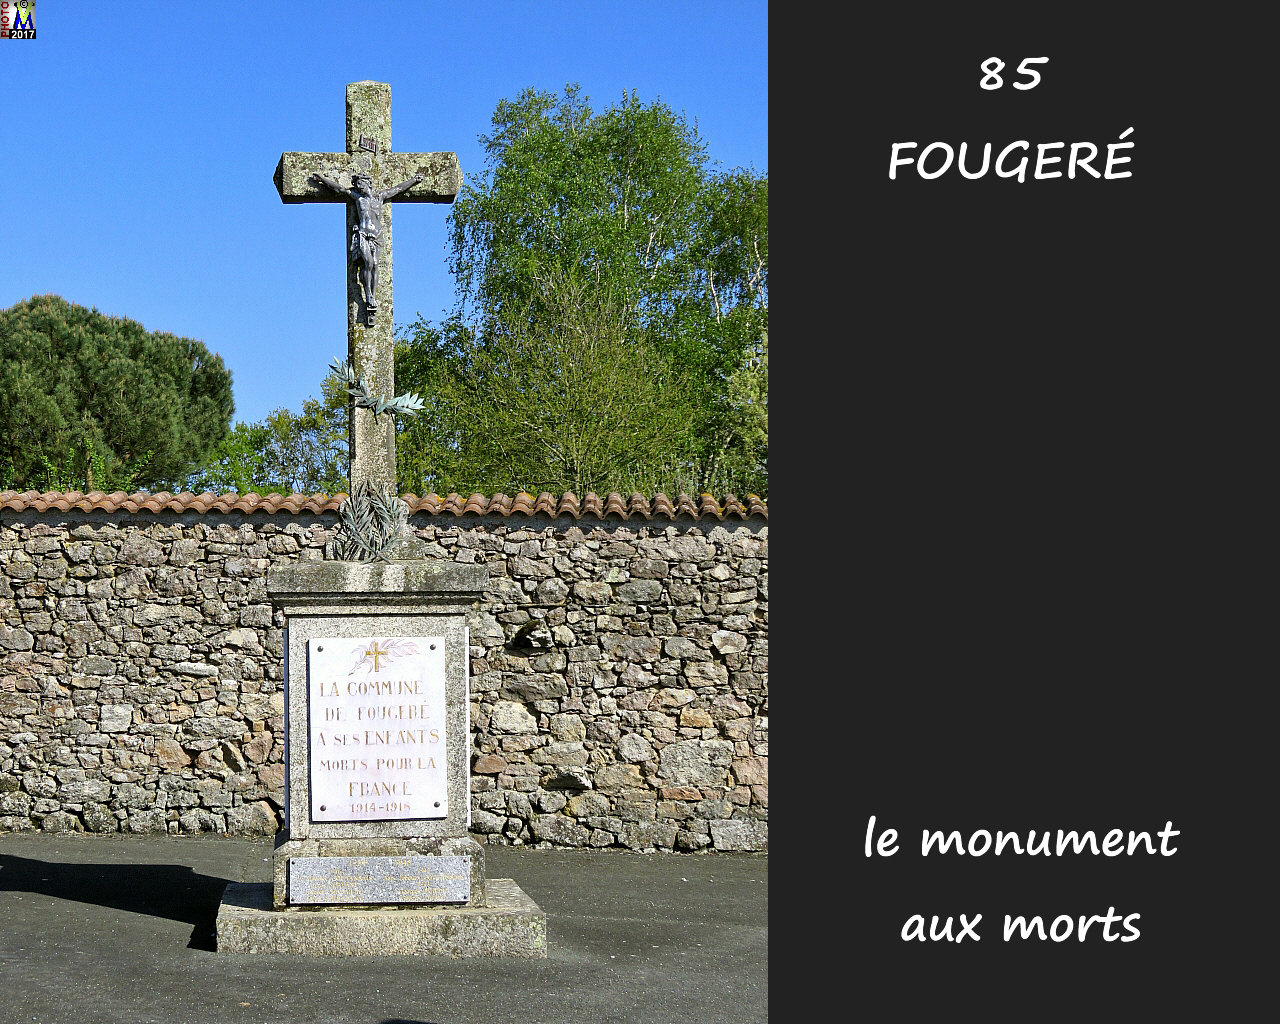 85FOUGERE_morts_1000.jpg